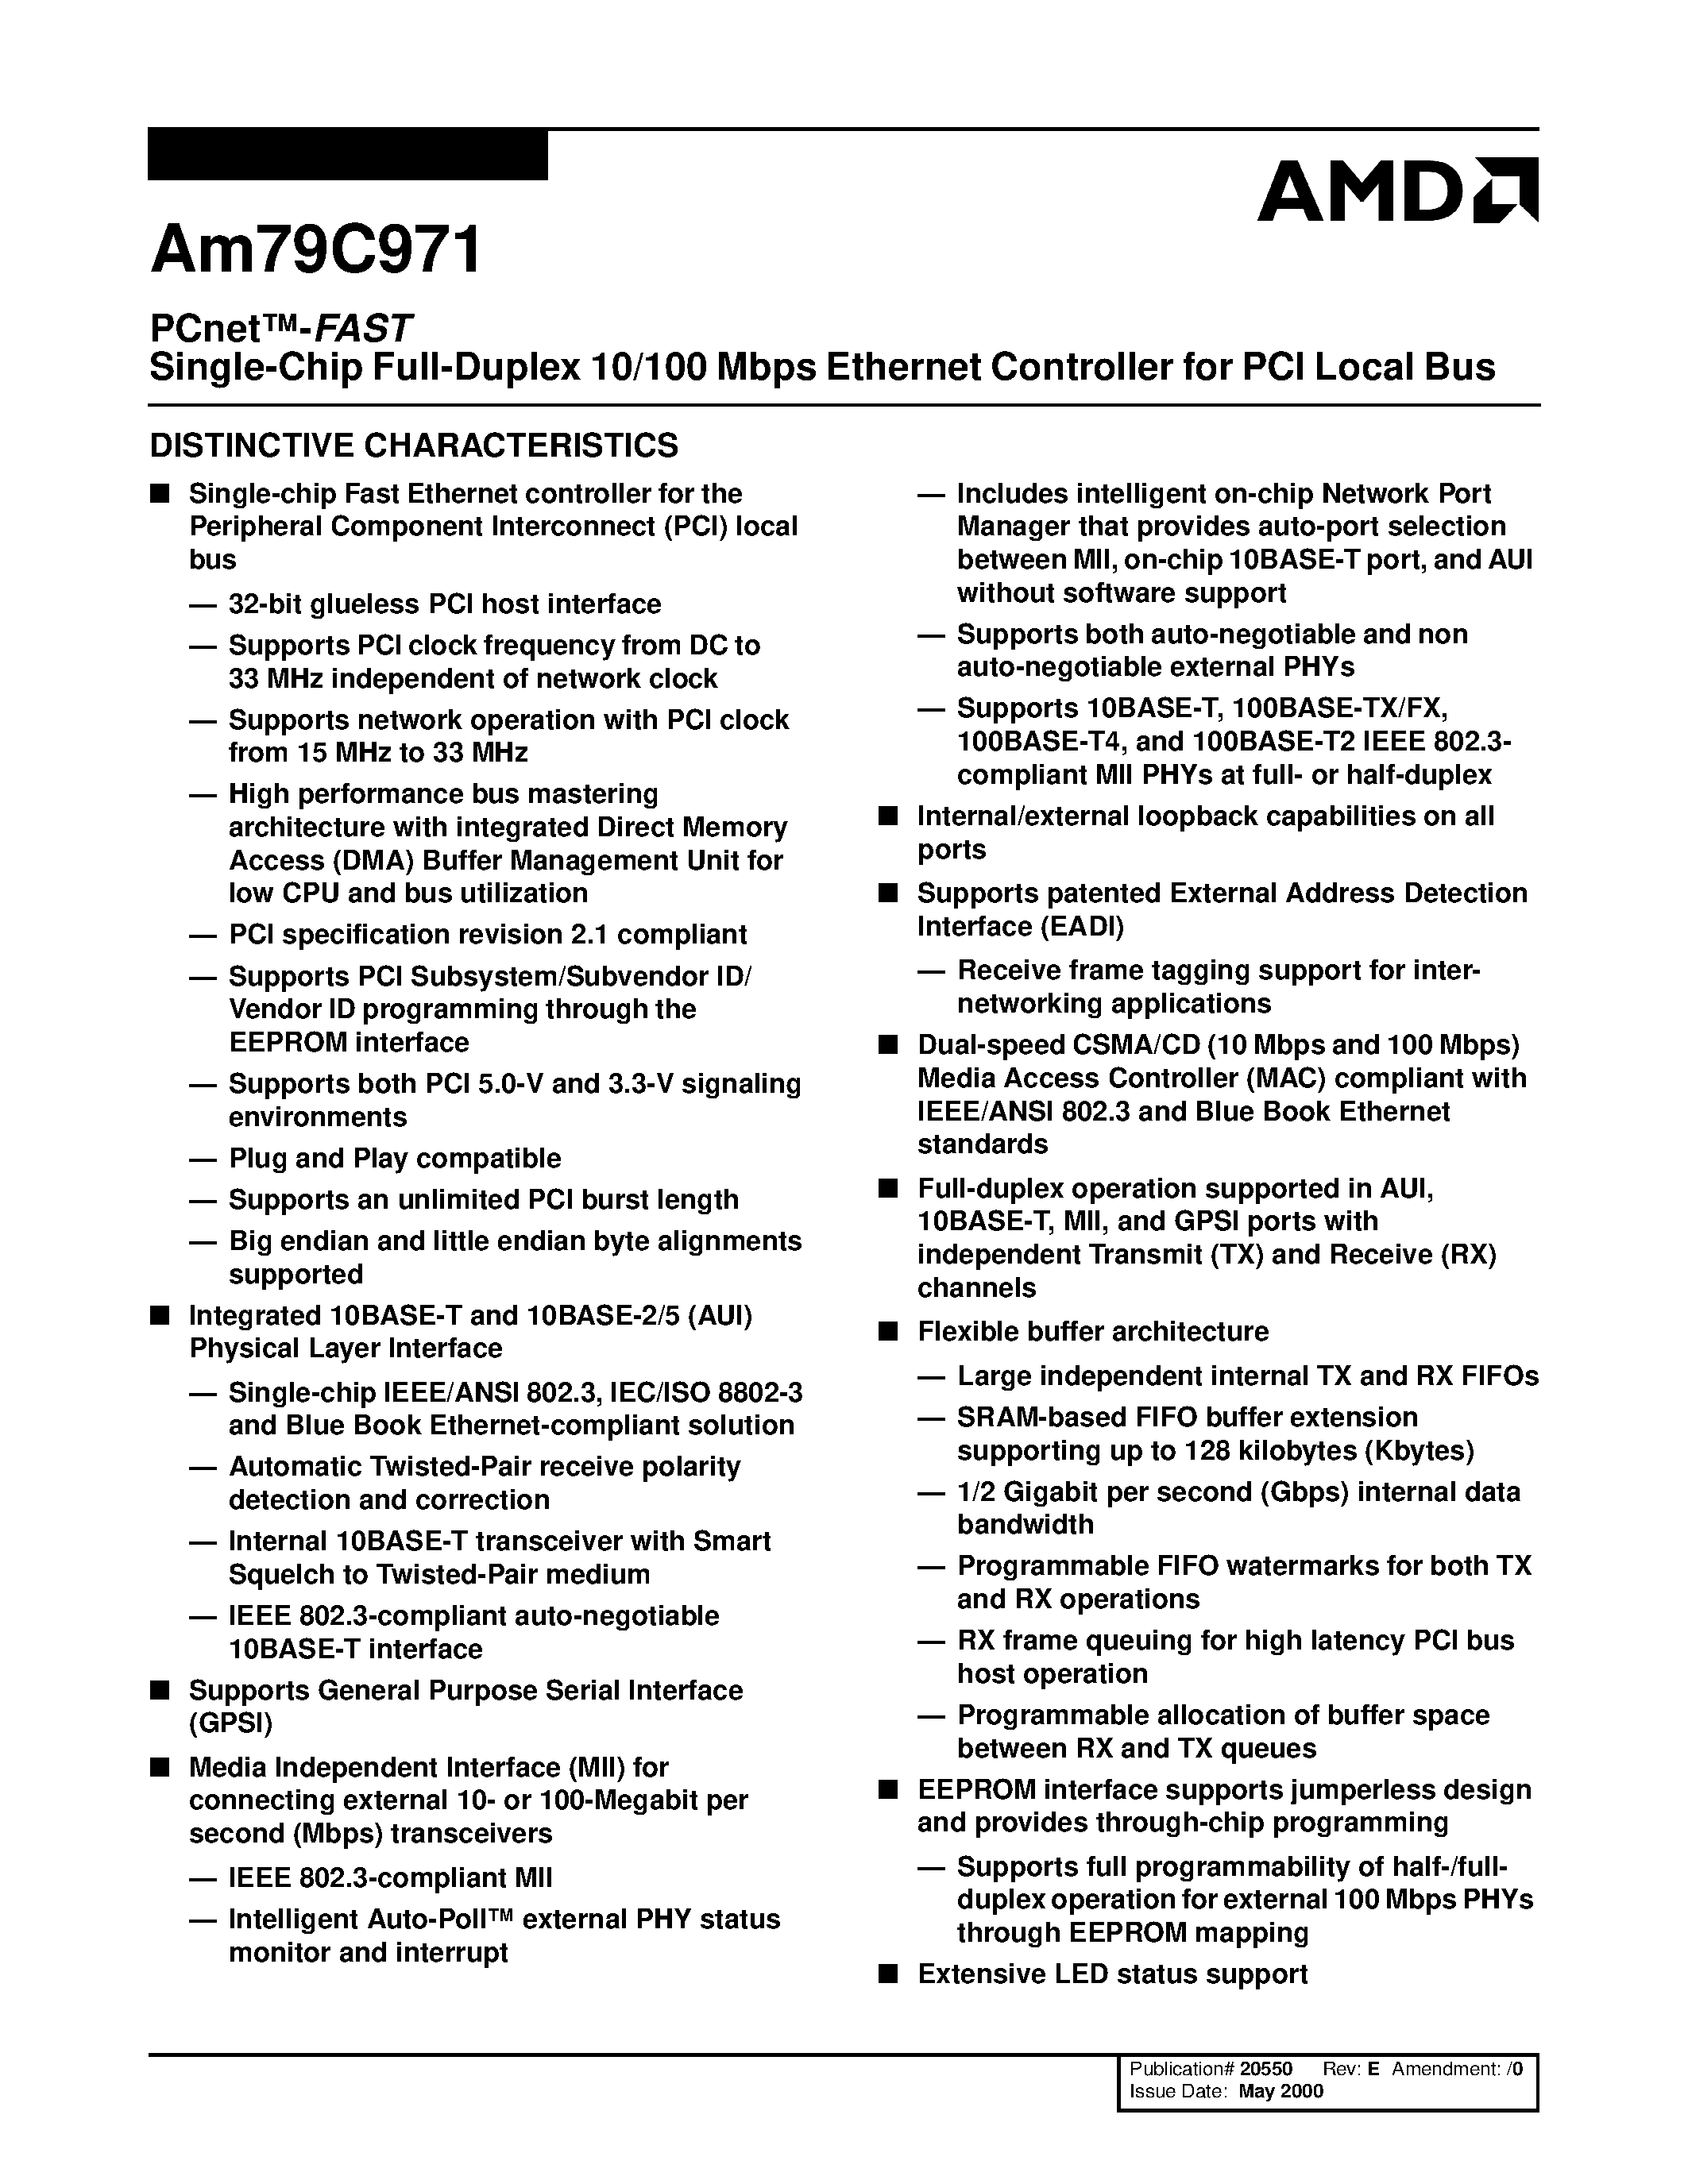 Даташит Am79C971KCW - PCnet-FAST Single-Chip Full-Duplex 10/100 Mbps Ethernet Controller for PCI Local Bus страница 1